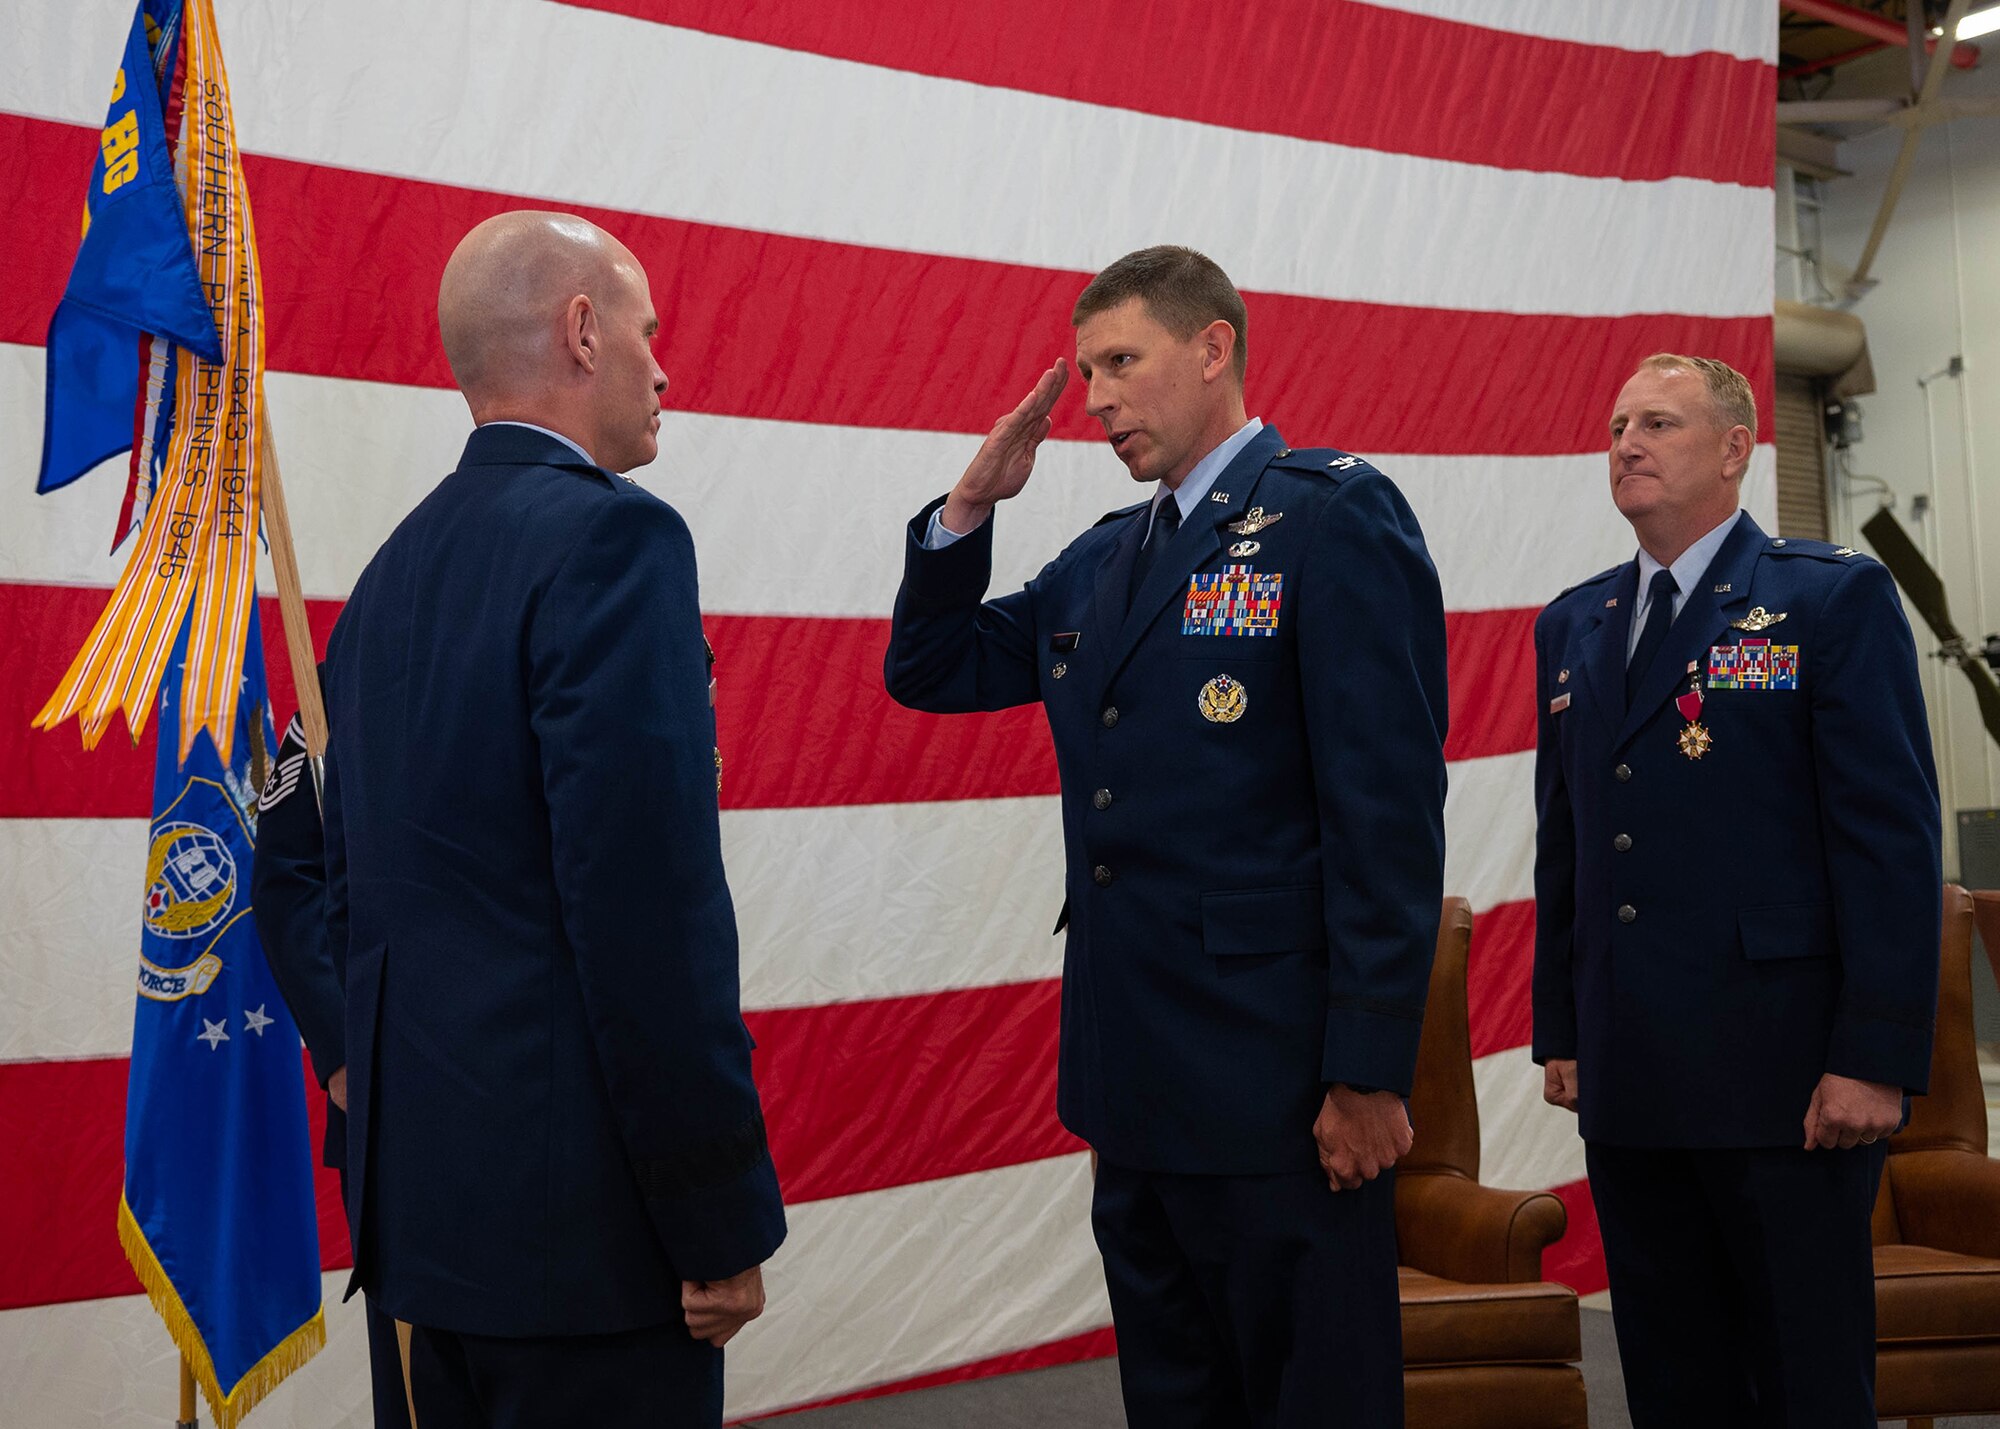 Air Force colonel saluting general in dress uniform